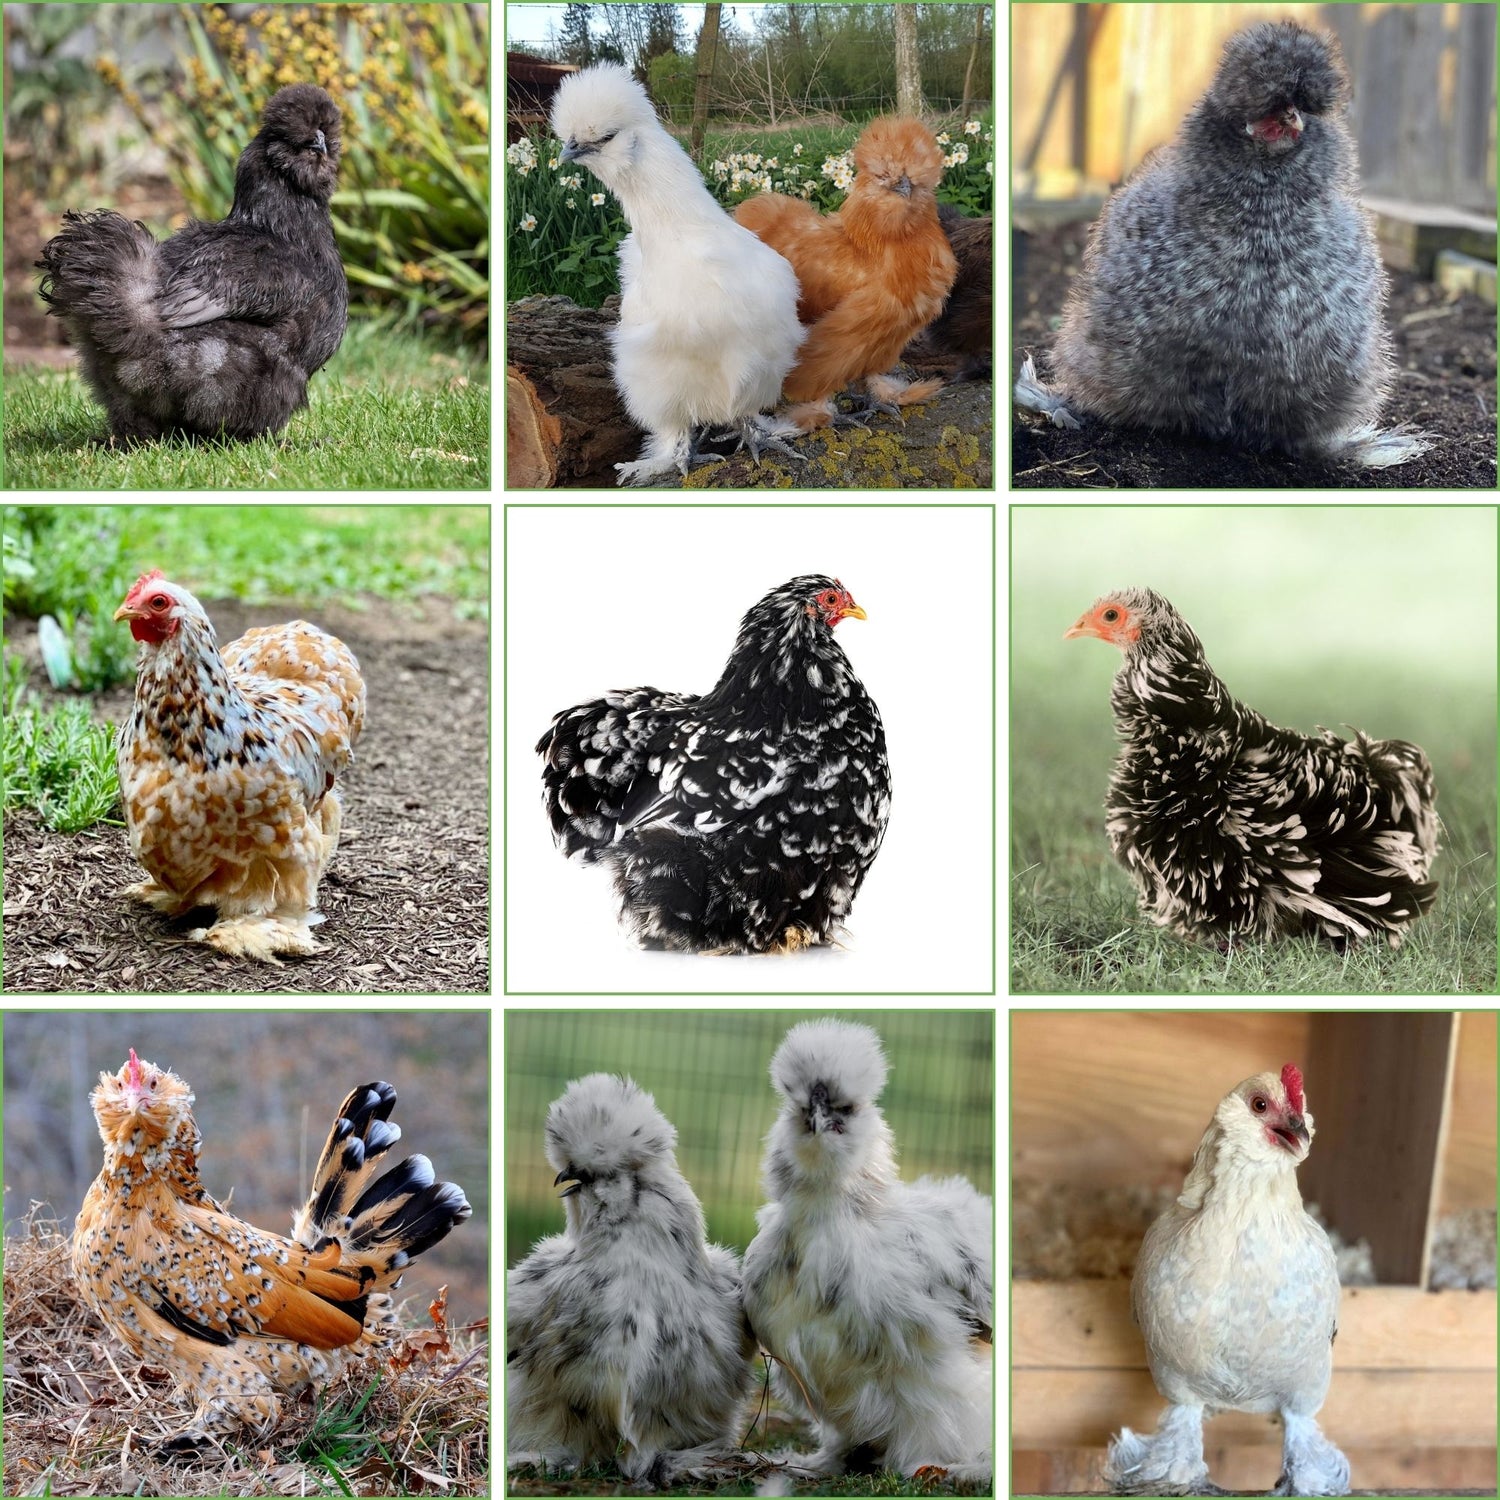 This assortment of chickens will include a feather legged bantam chicken.